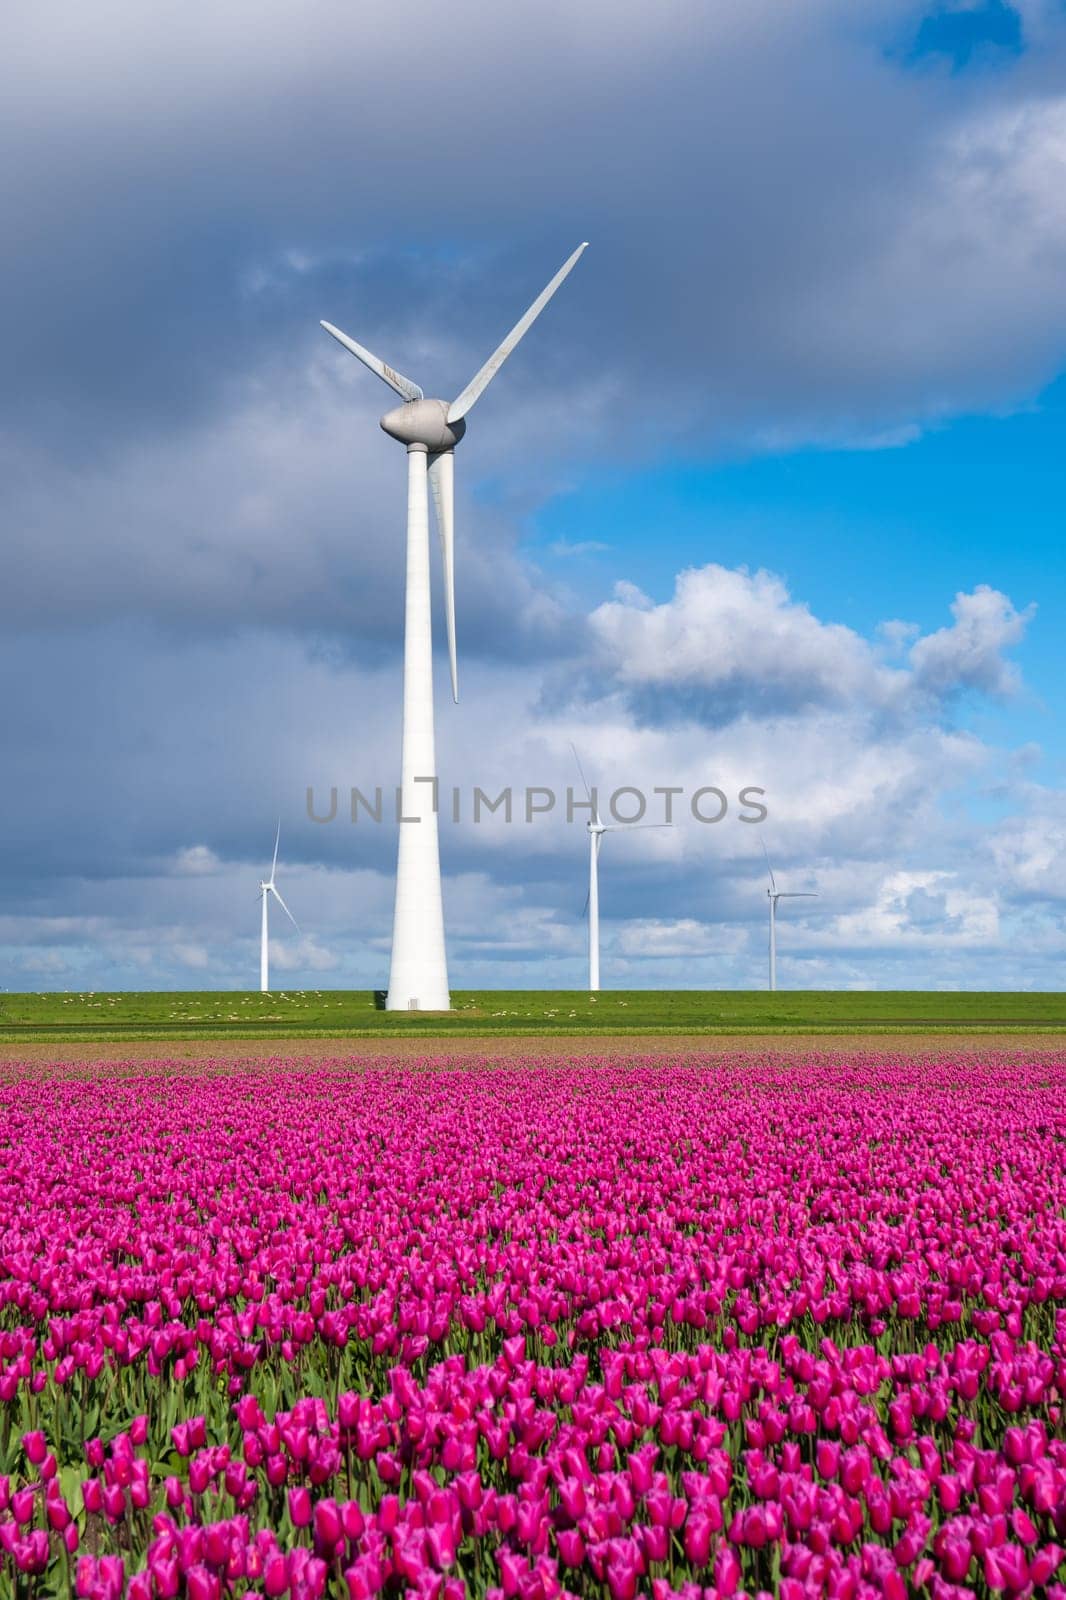 A vibrant field of purple tulips sways gracefully in the spring breeze, with a traditional windmill standing tall in the background by fokkebok